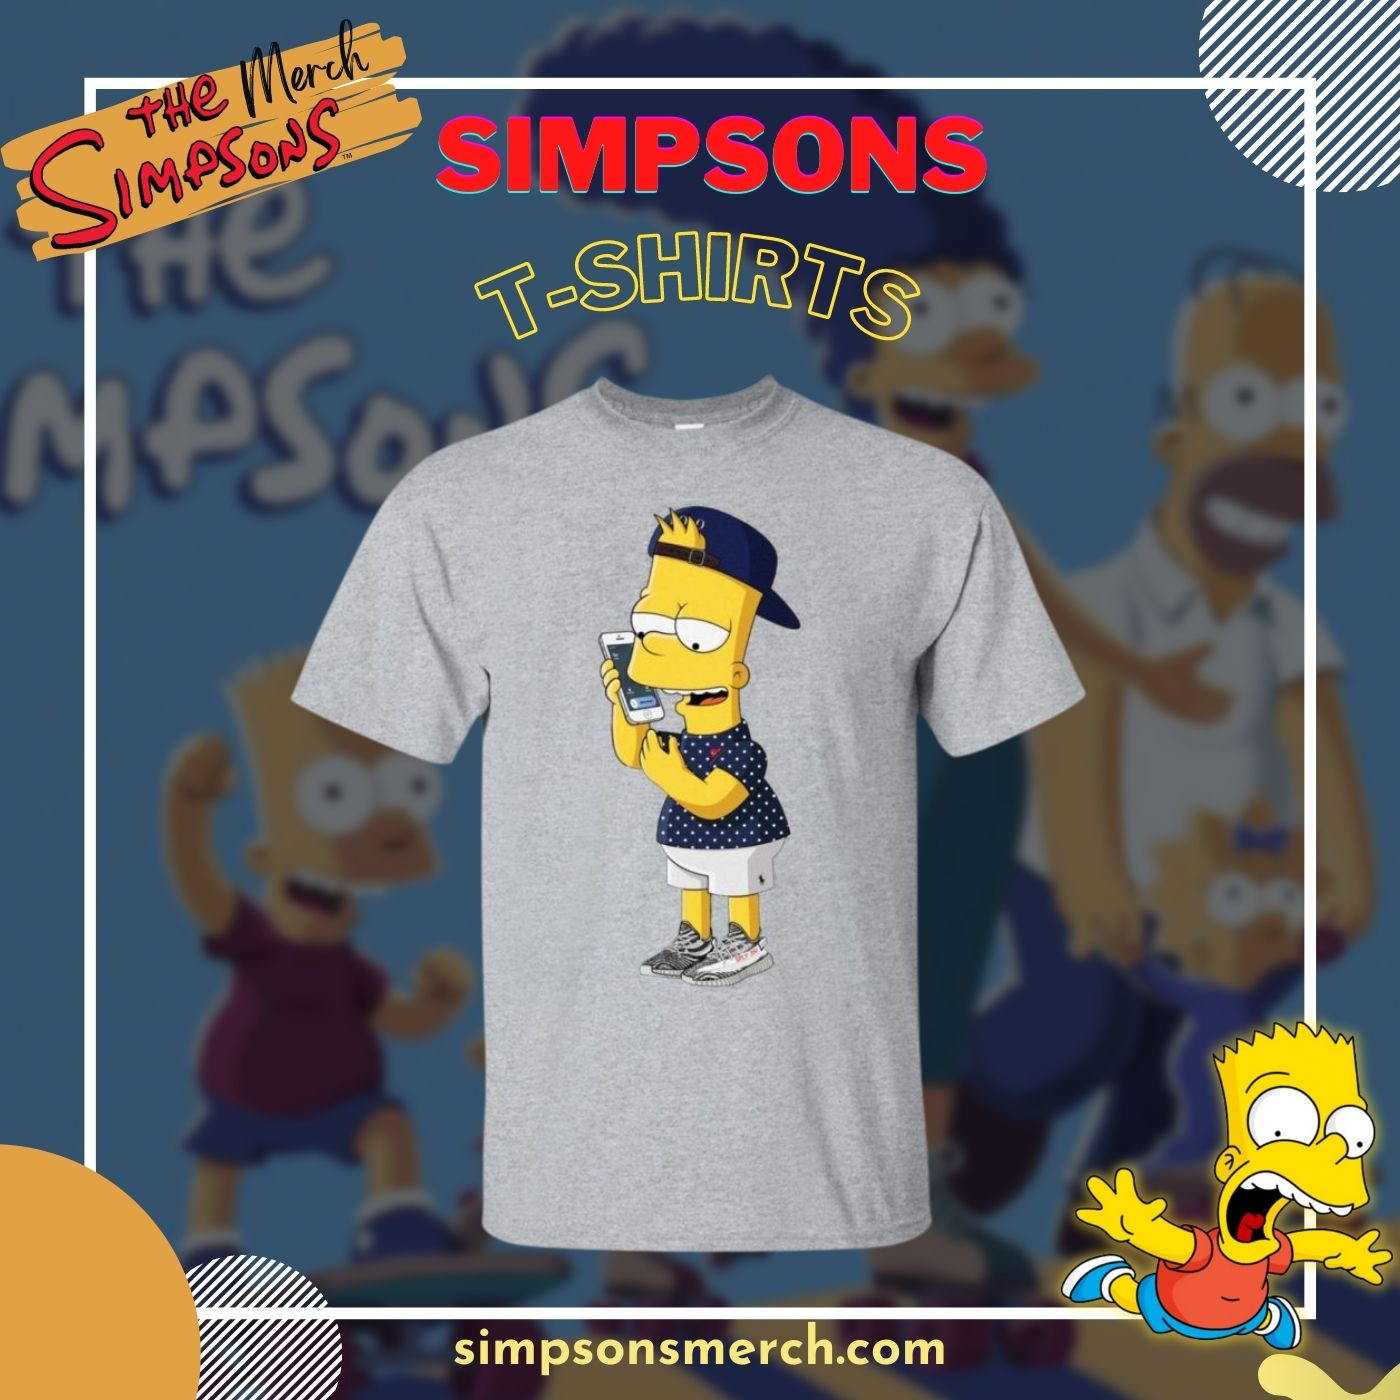 SimpSons T Shirts 1 - The Simpsons Shop